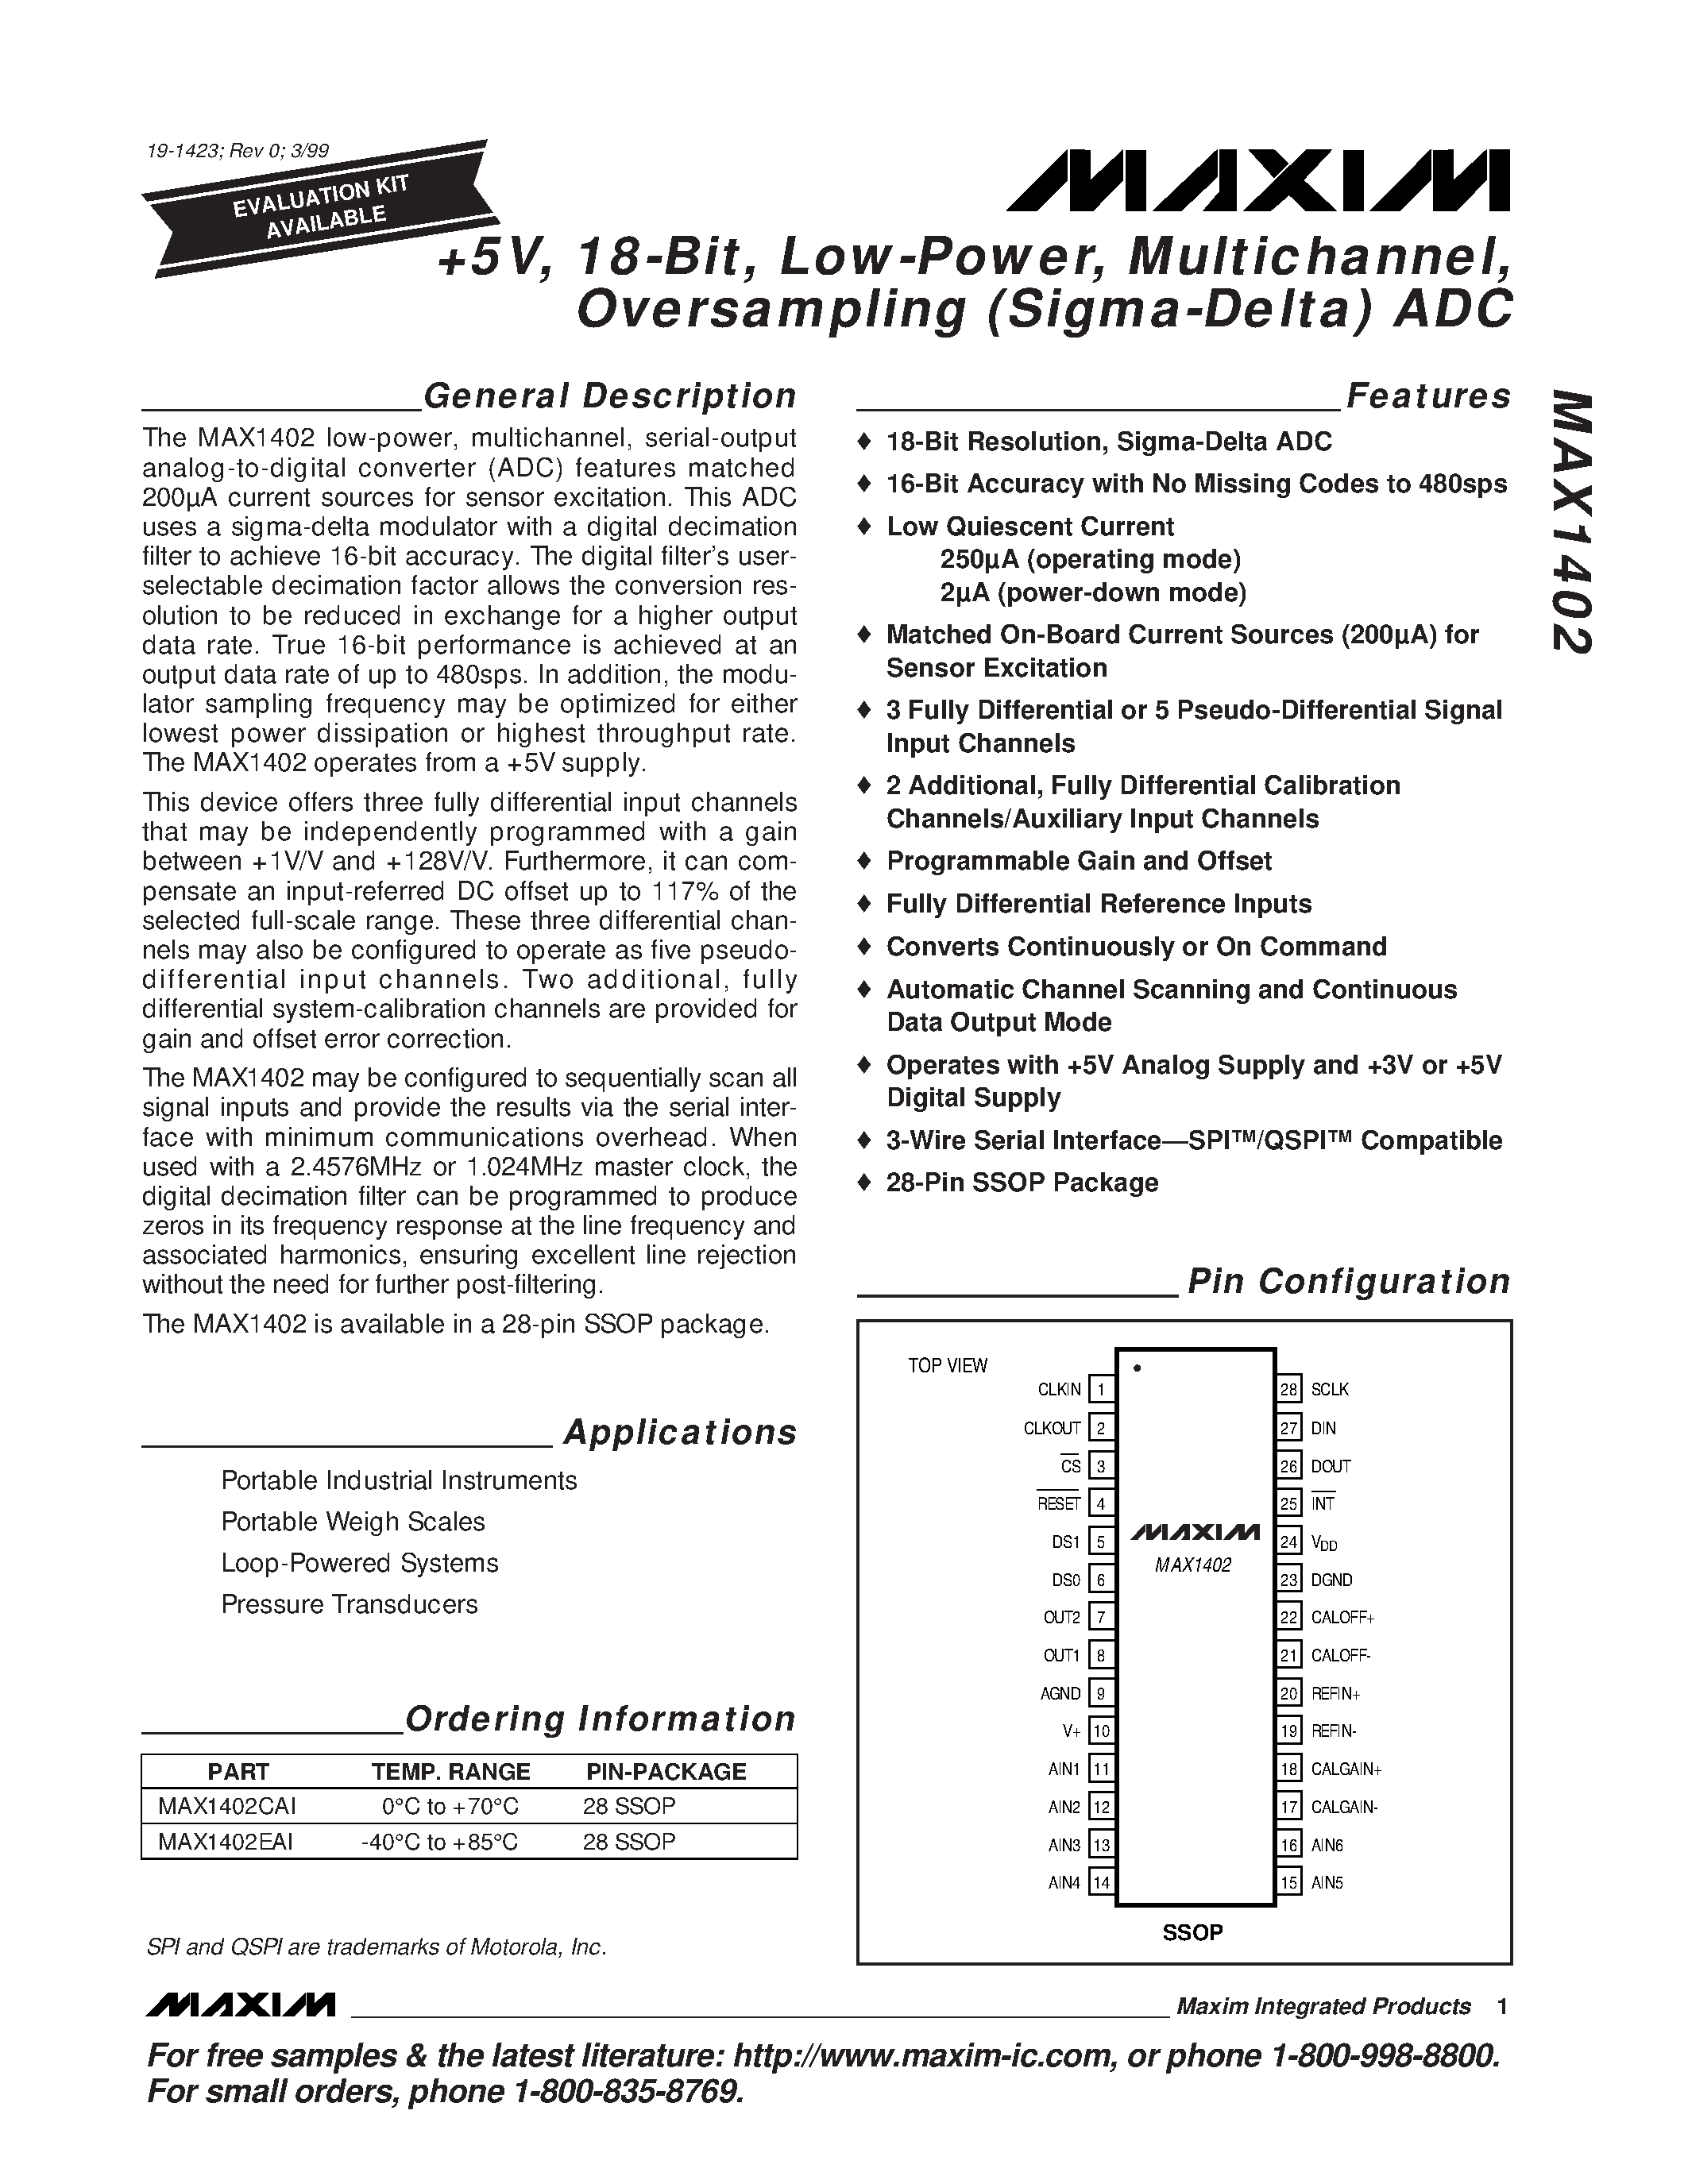 Datasheet MAX1402EAI - +5V / 18-Bit / Low-Power / Multichannel / Oversampling Sigma-Delta ADC page 1